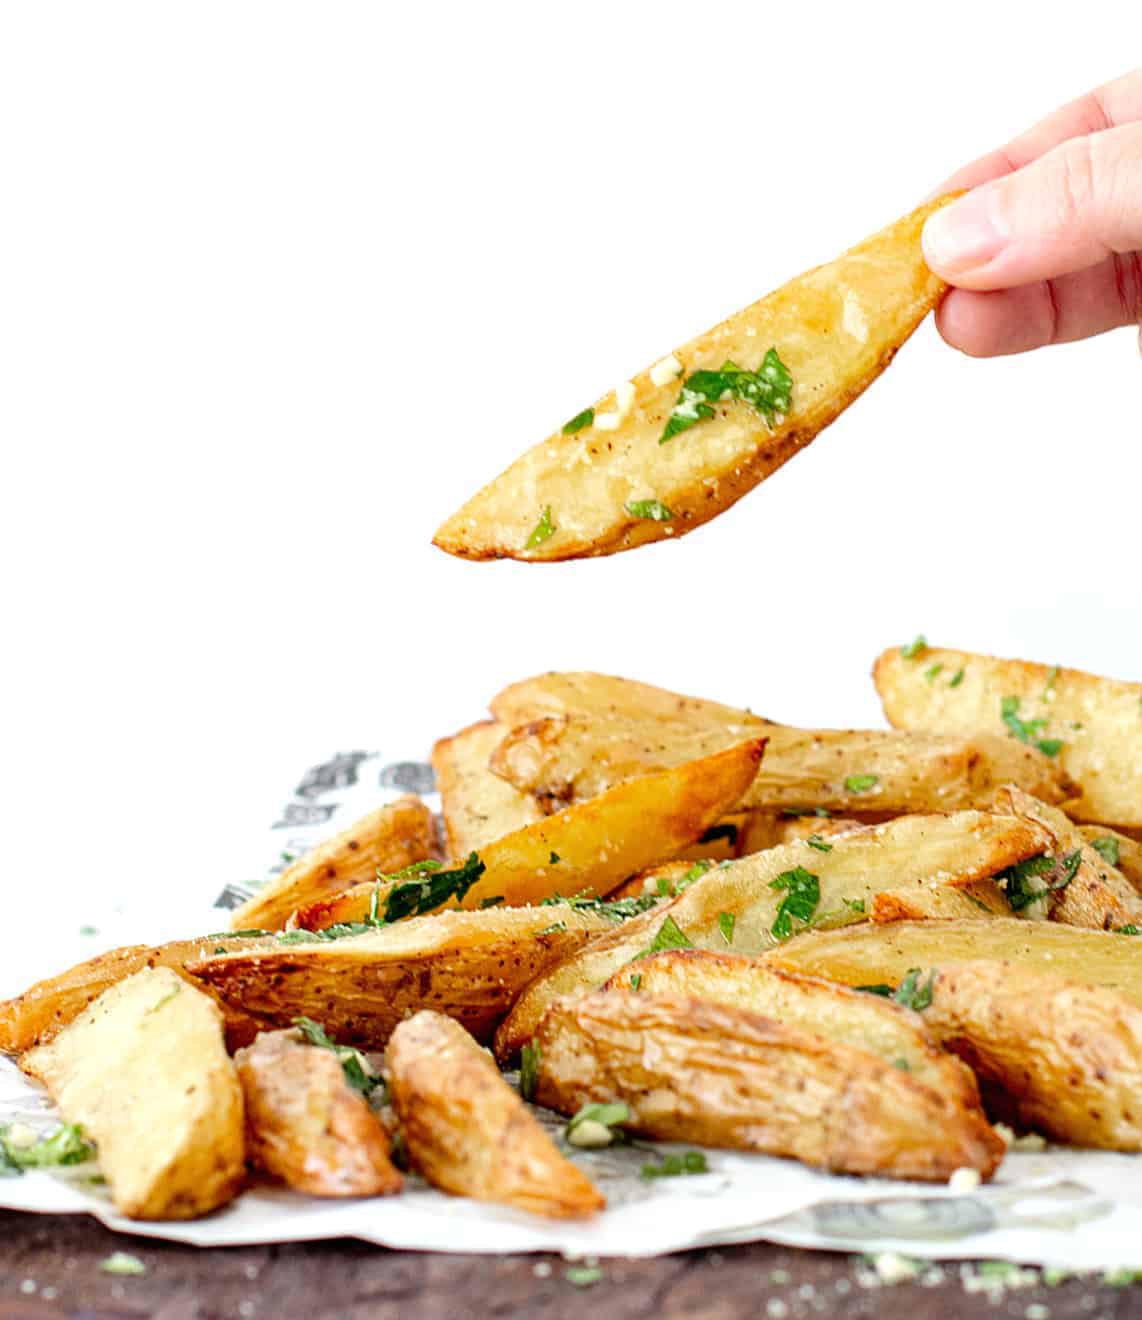 Hand holding potato wedge beneath a mound of potato wedges on a wooden board